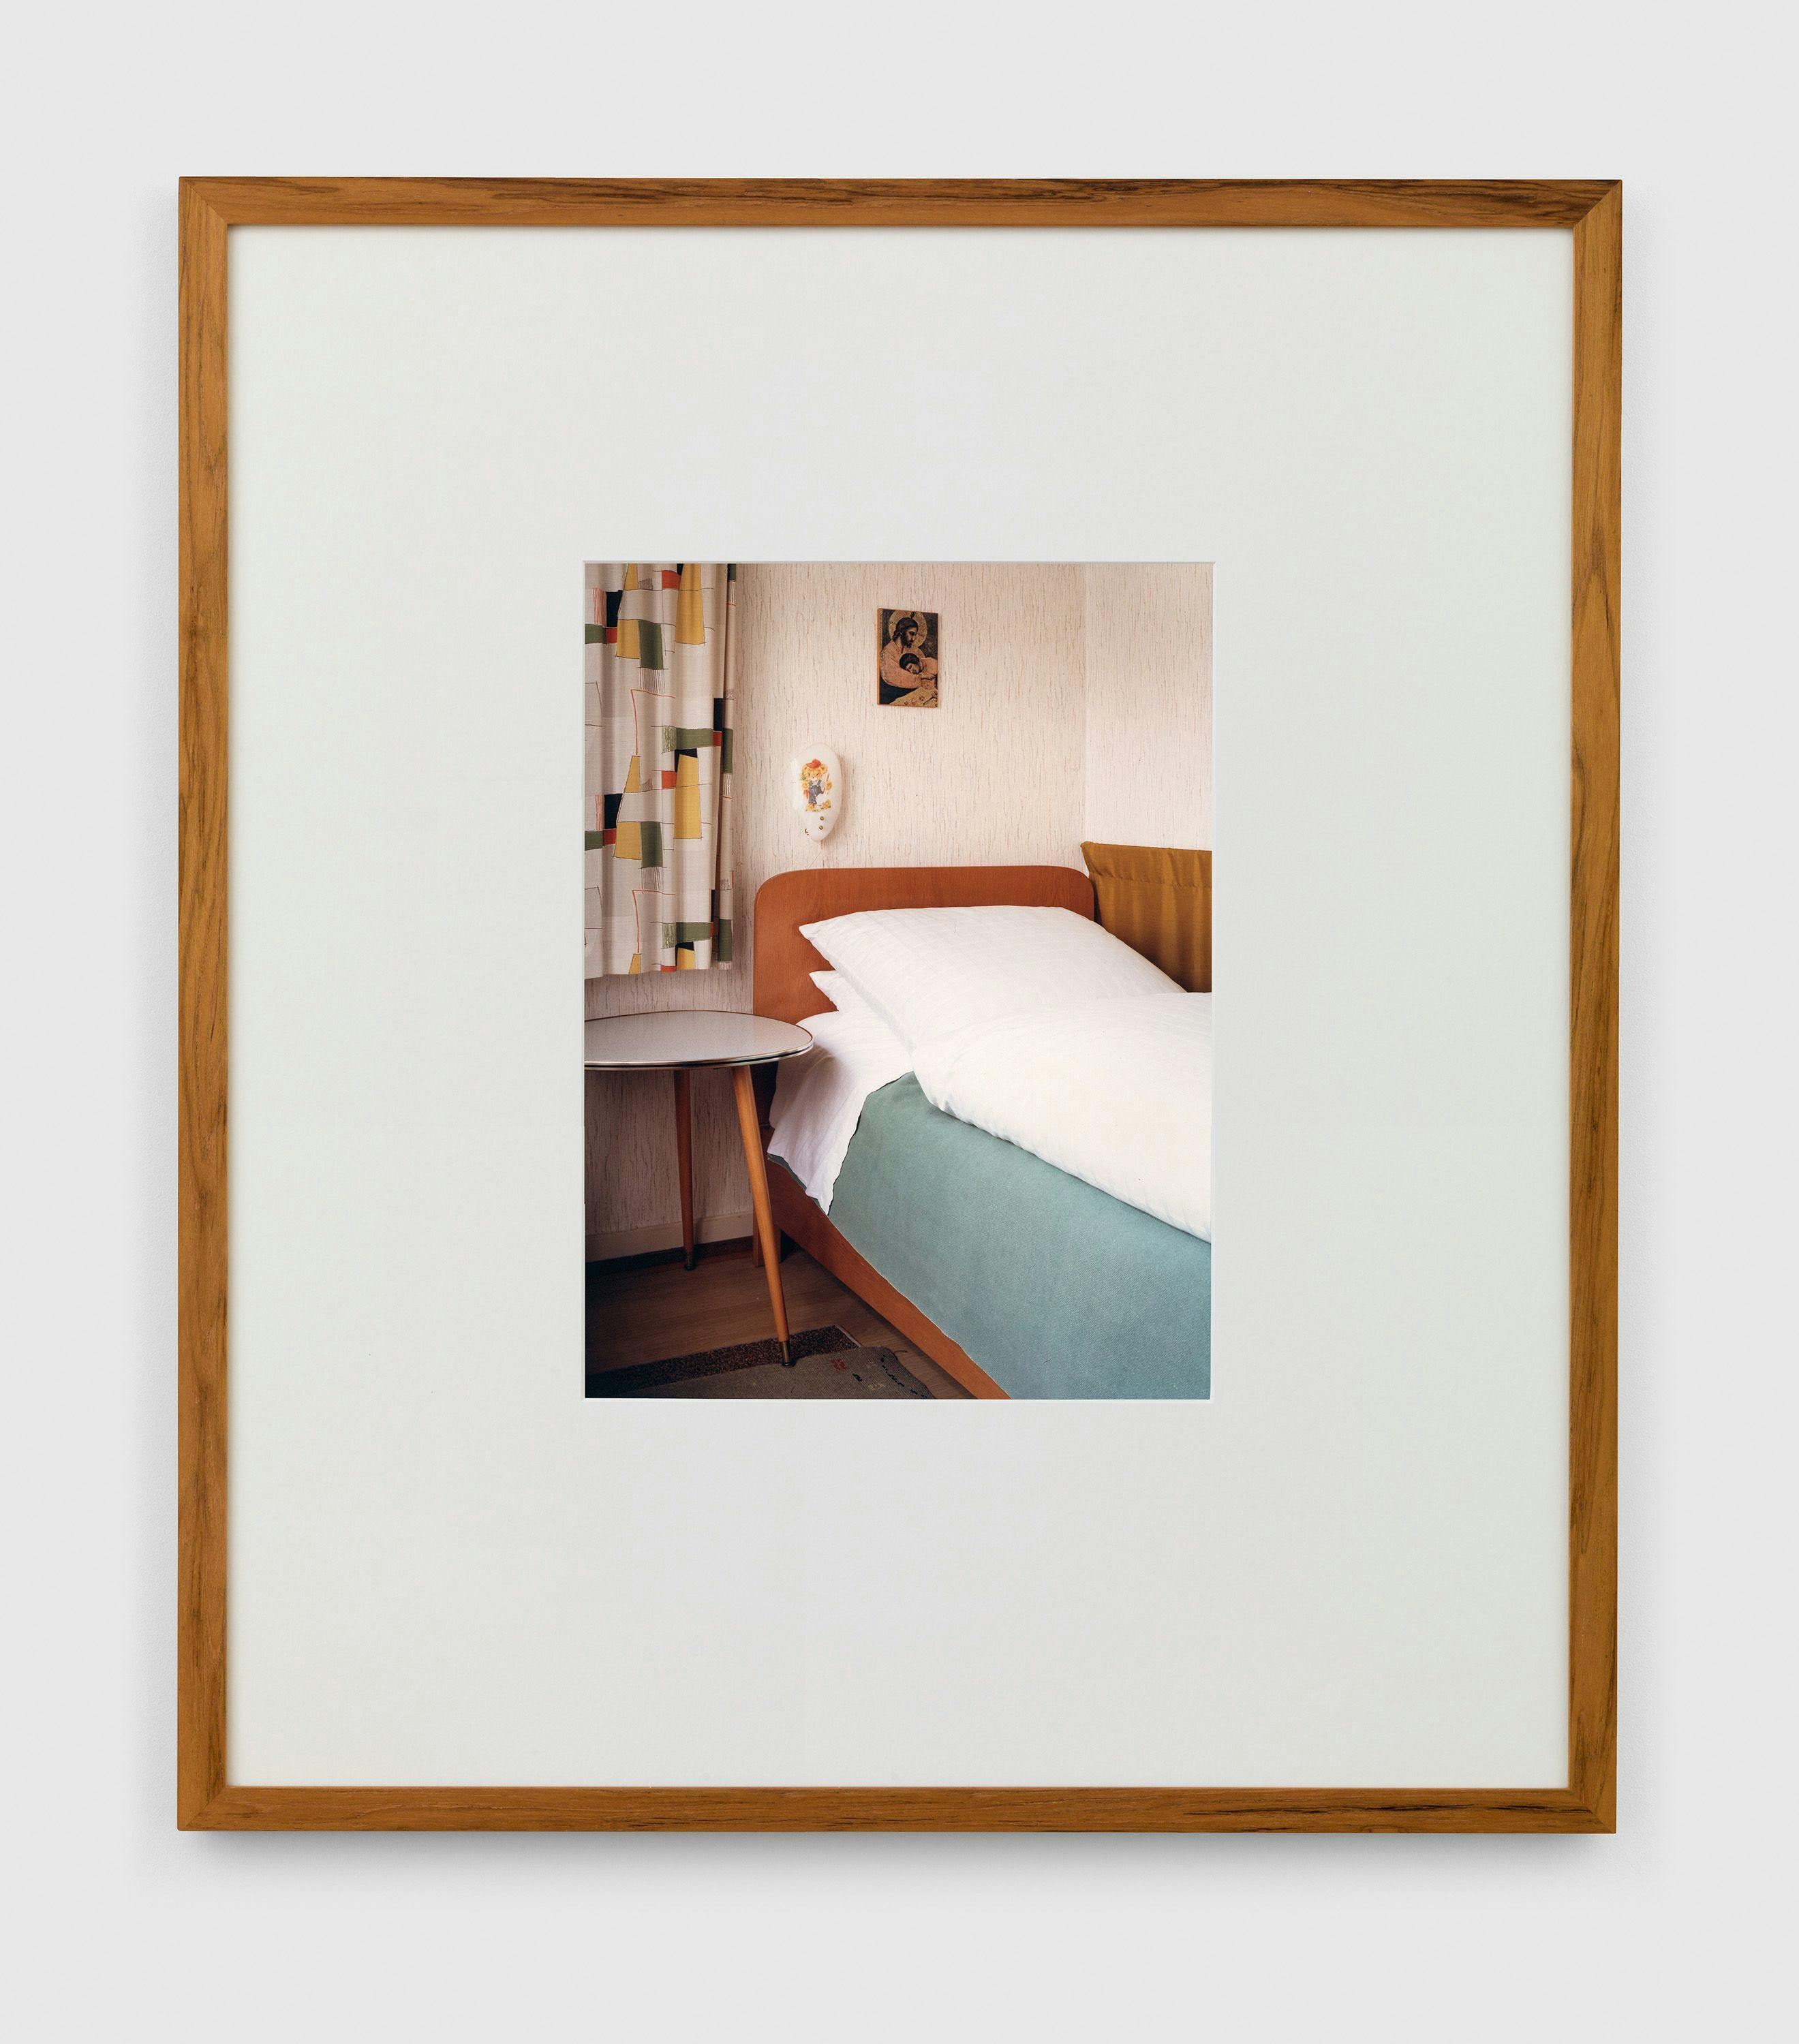 A chromogenic print with Diasec by Thomas Ruff, titled Interior 2B, dated 1980.